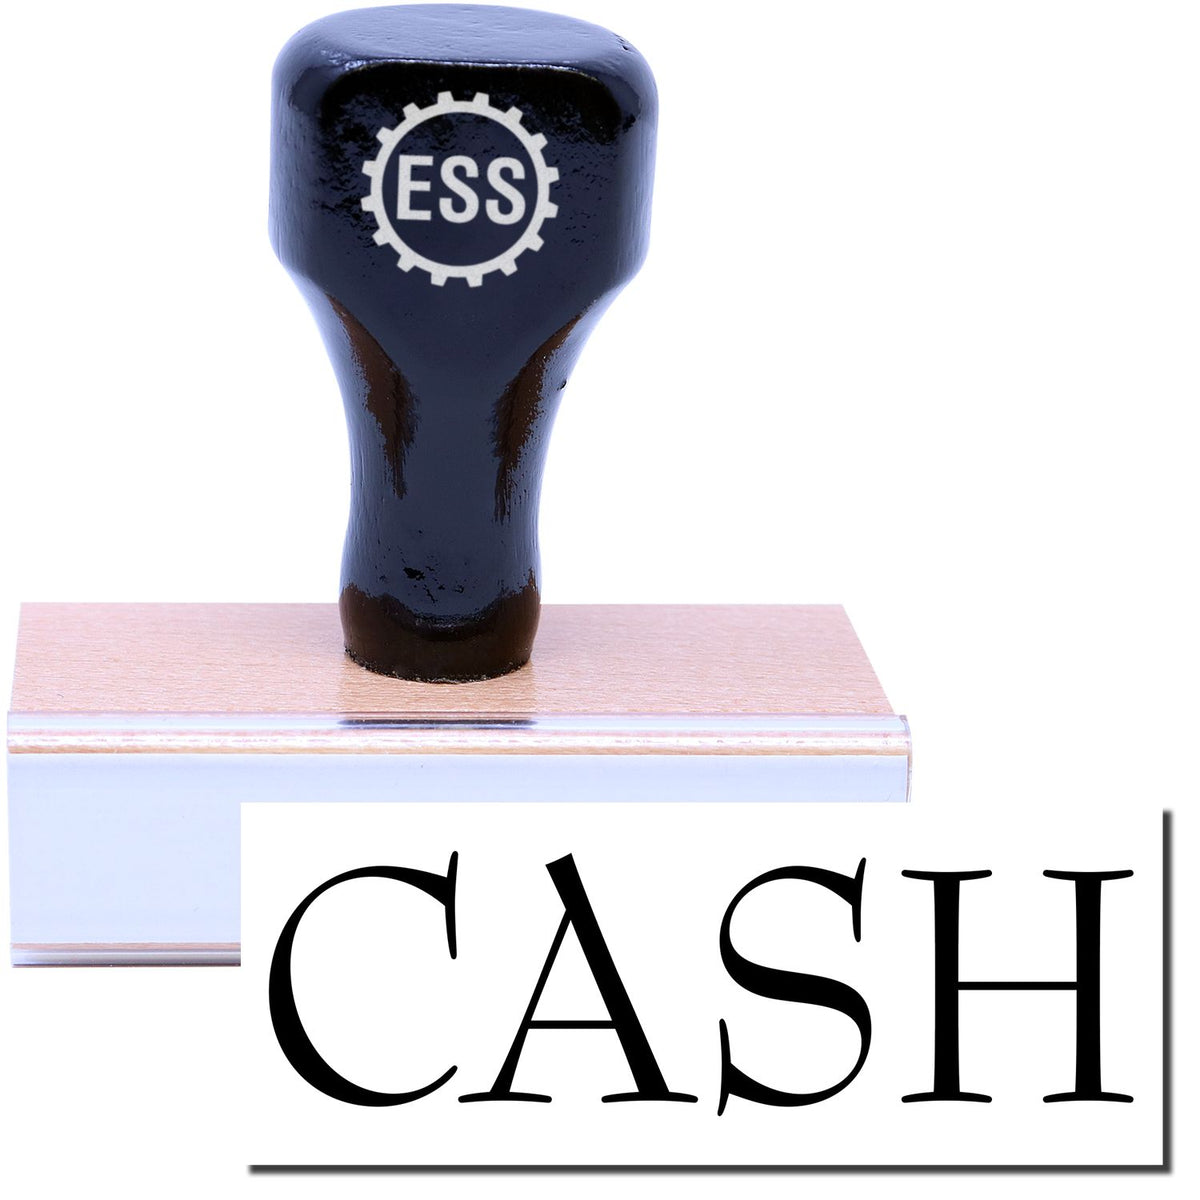 A stock office rubber stamp with a stamped image showing how the text &quot;CASH&quot; is displayed after stamping.